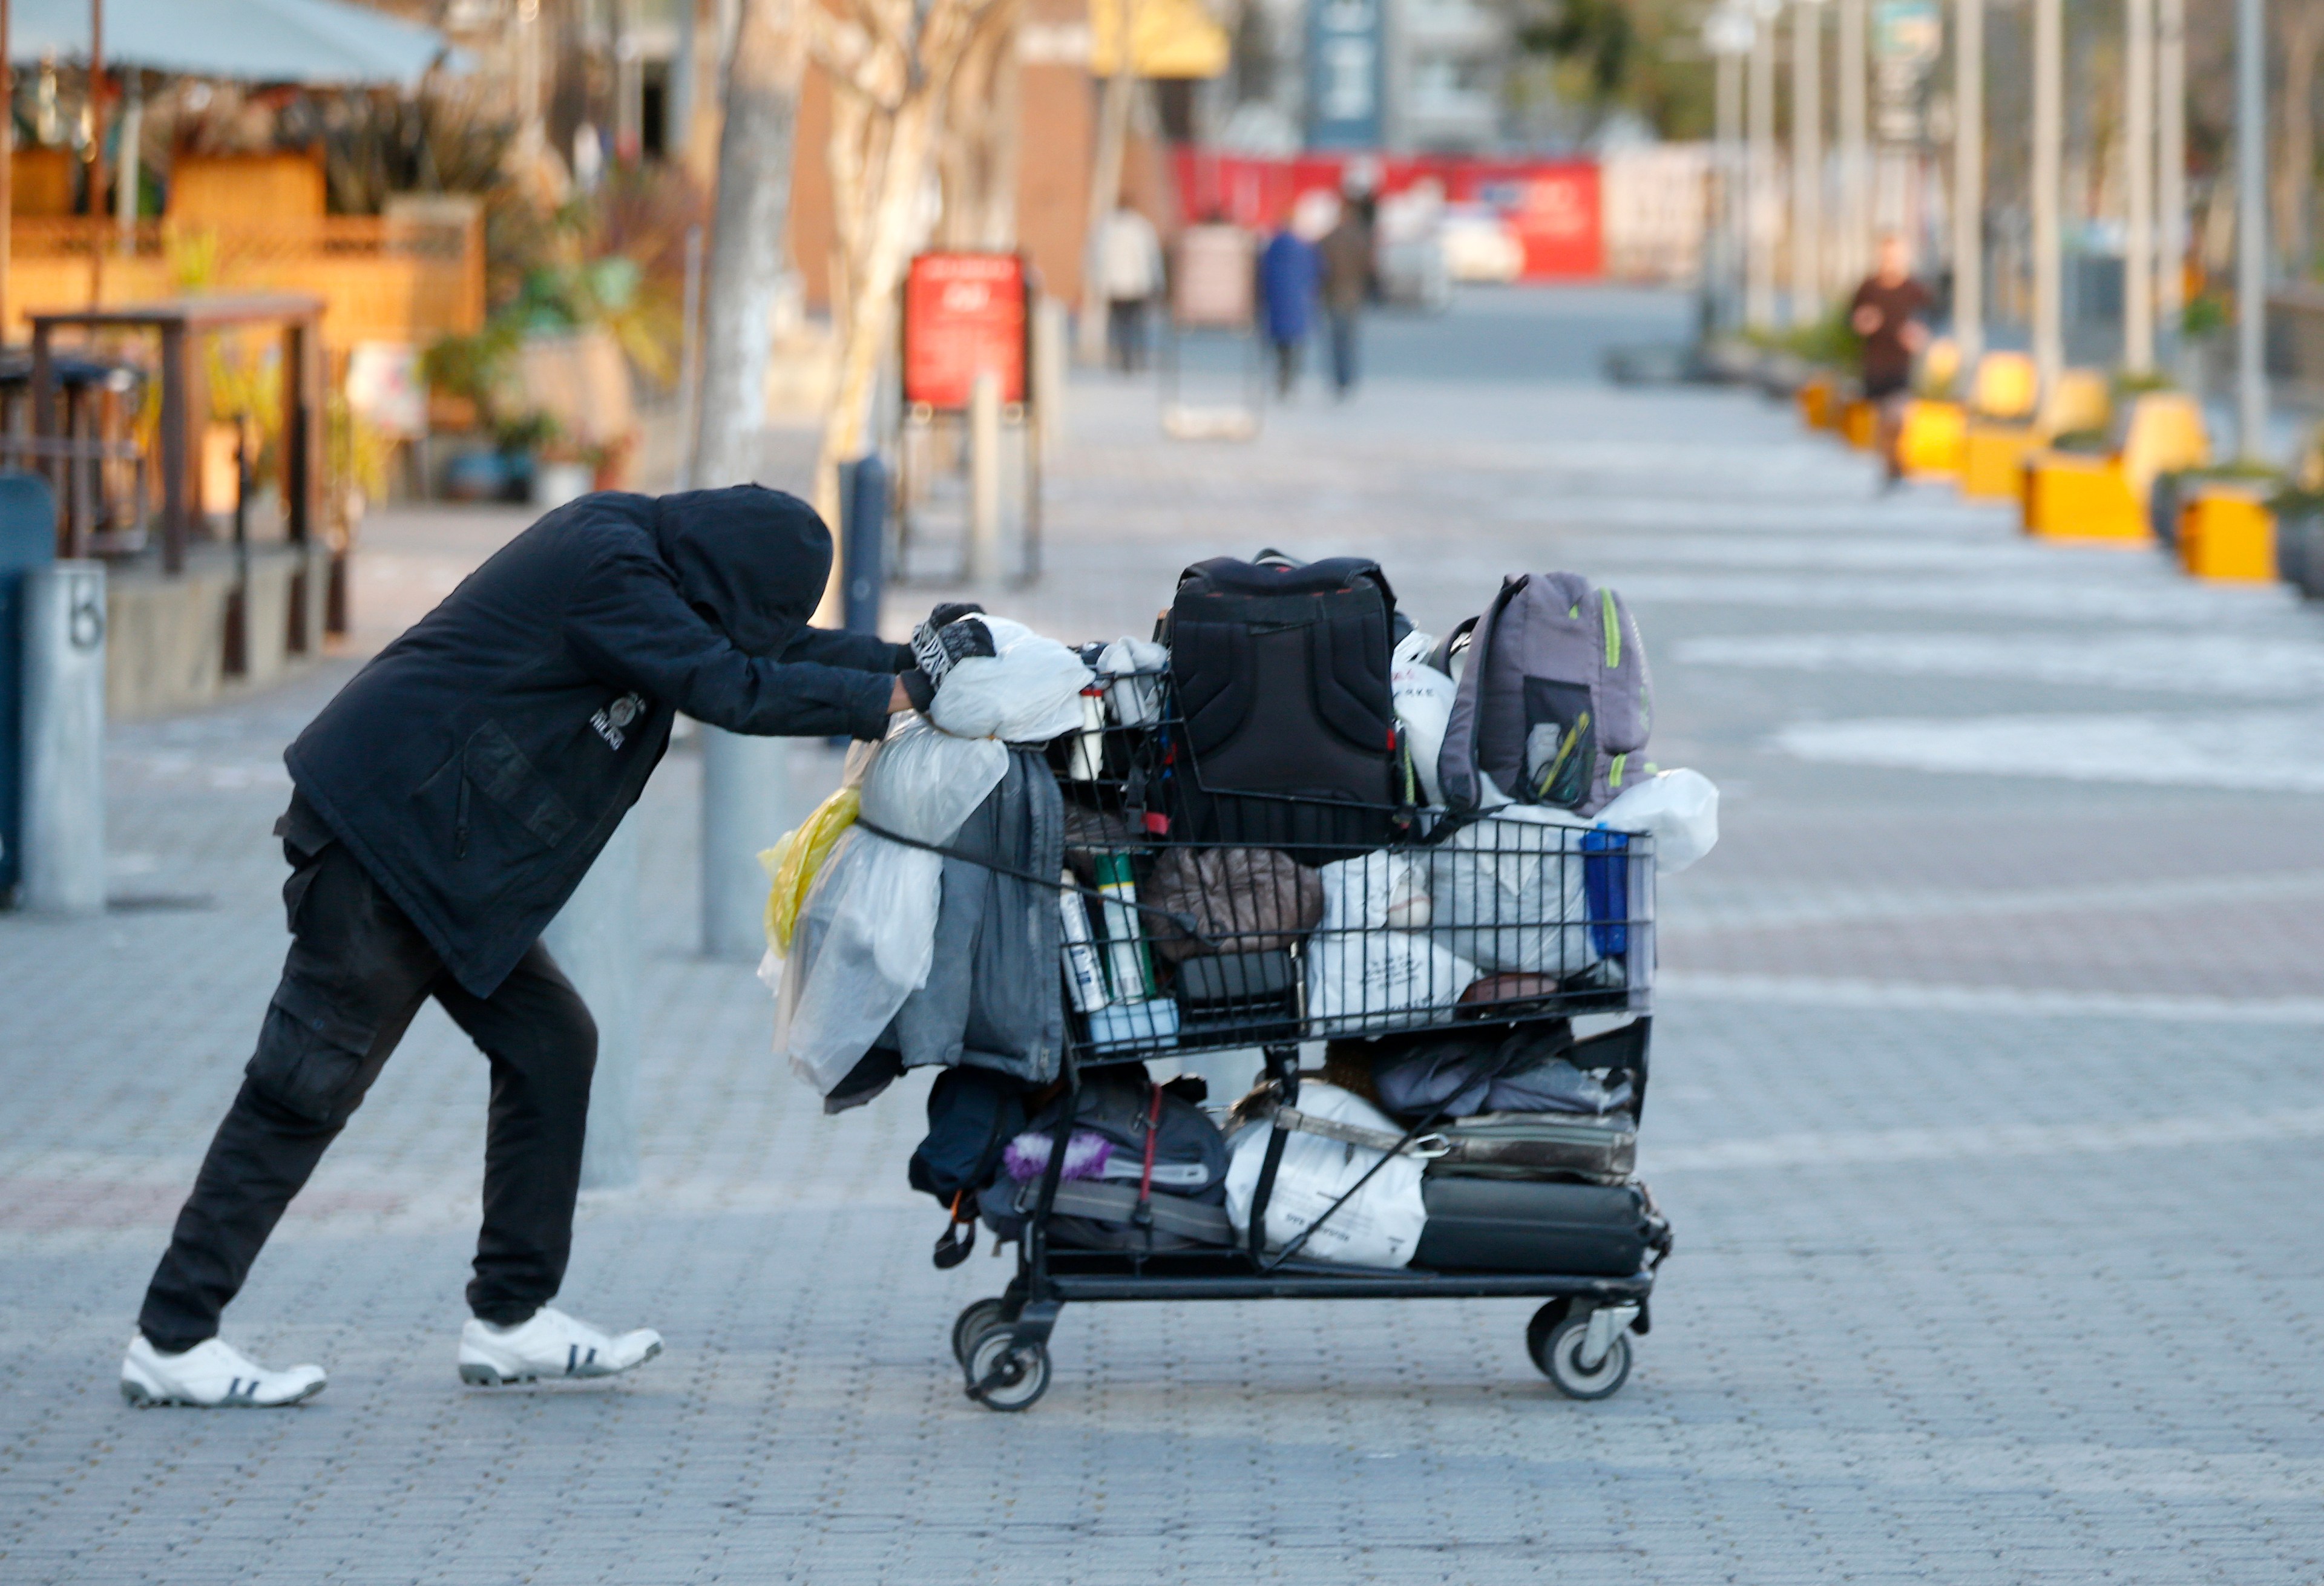 A man in black attire pushes a shopping cart full of belongings.